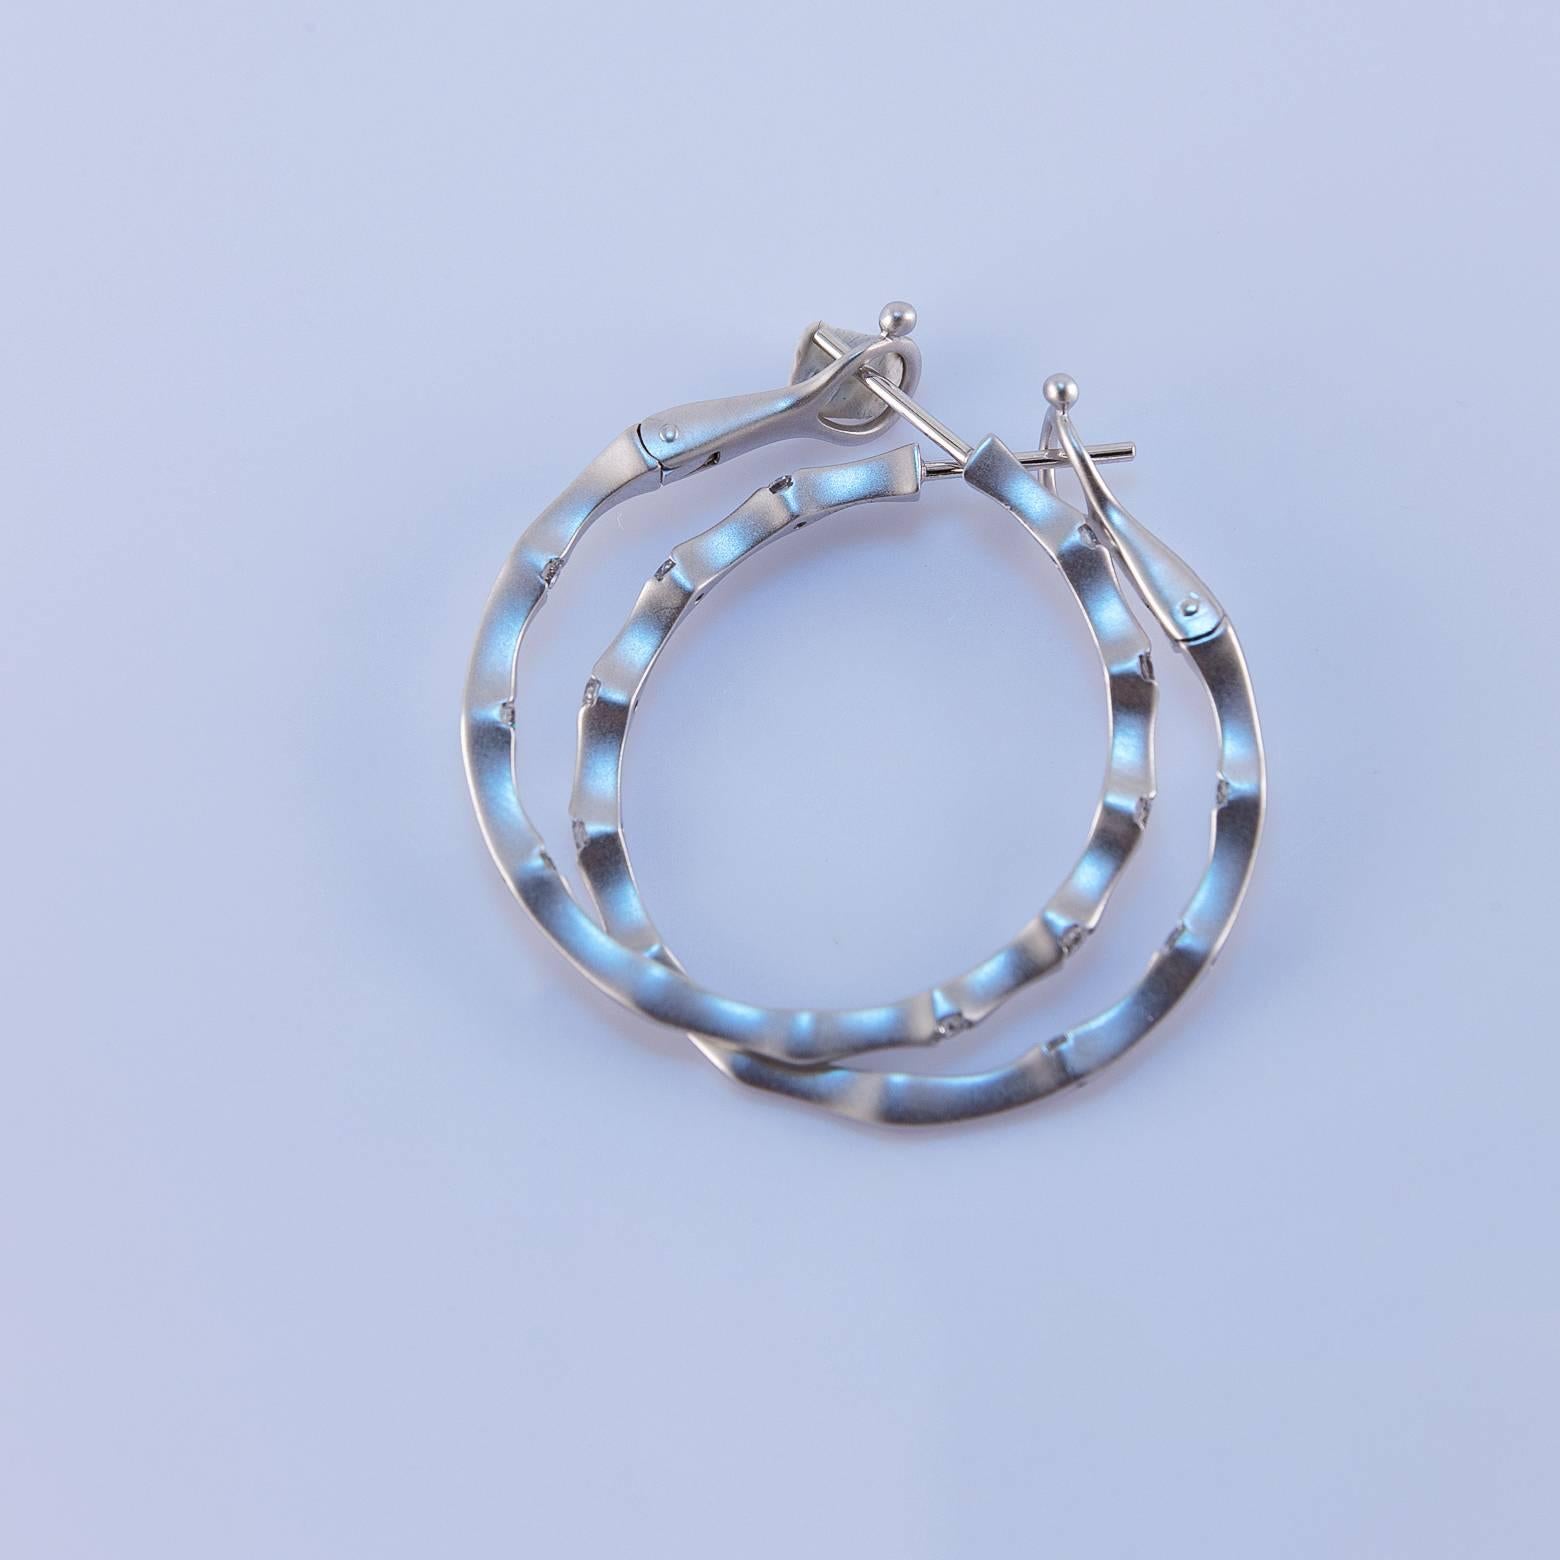 These stunners have 16 diamonds 0.50 ct diamonds.The bamboo design is free flowing and modern which makes these hoops so original. There is a safety clasp on the back post so you can wear these and 'dance the night away' or swim in the ocean in that